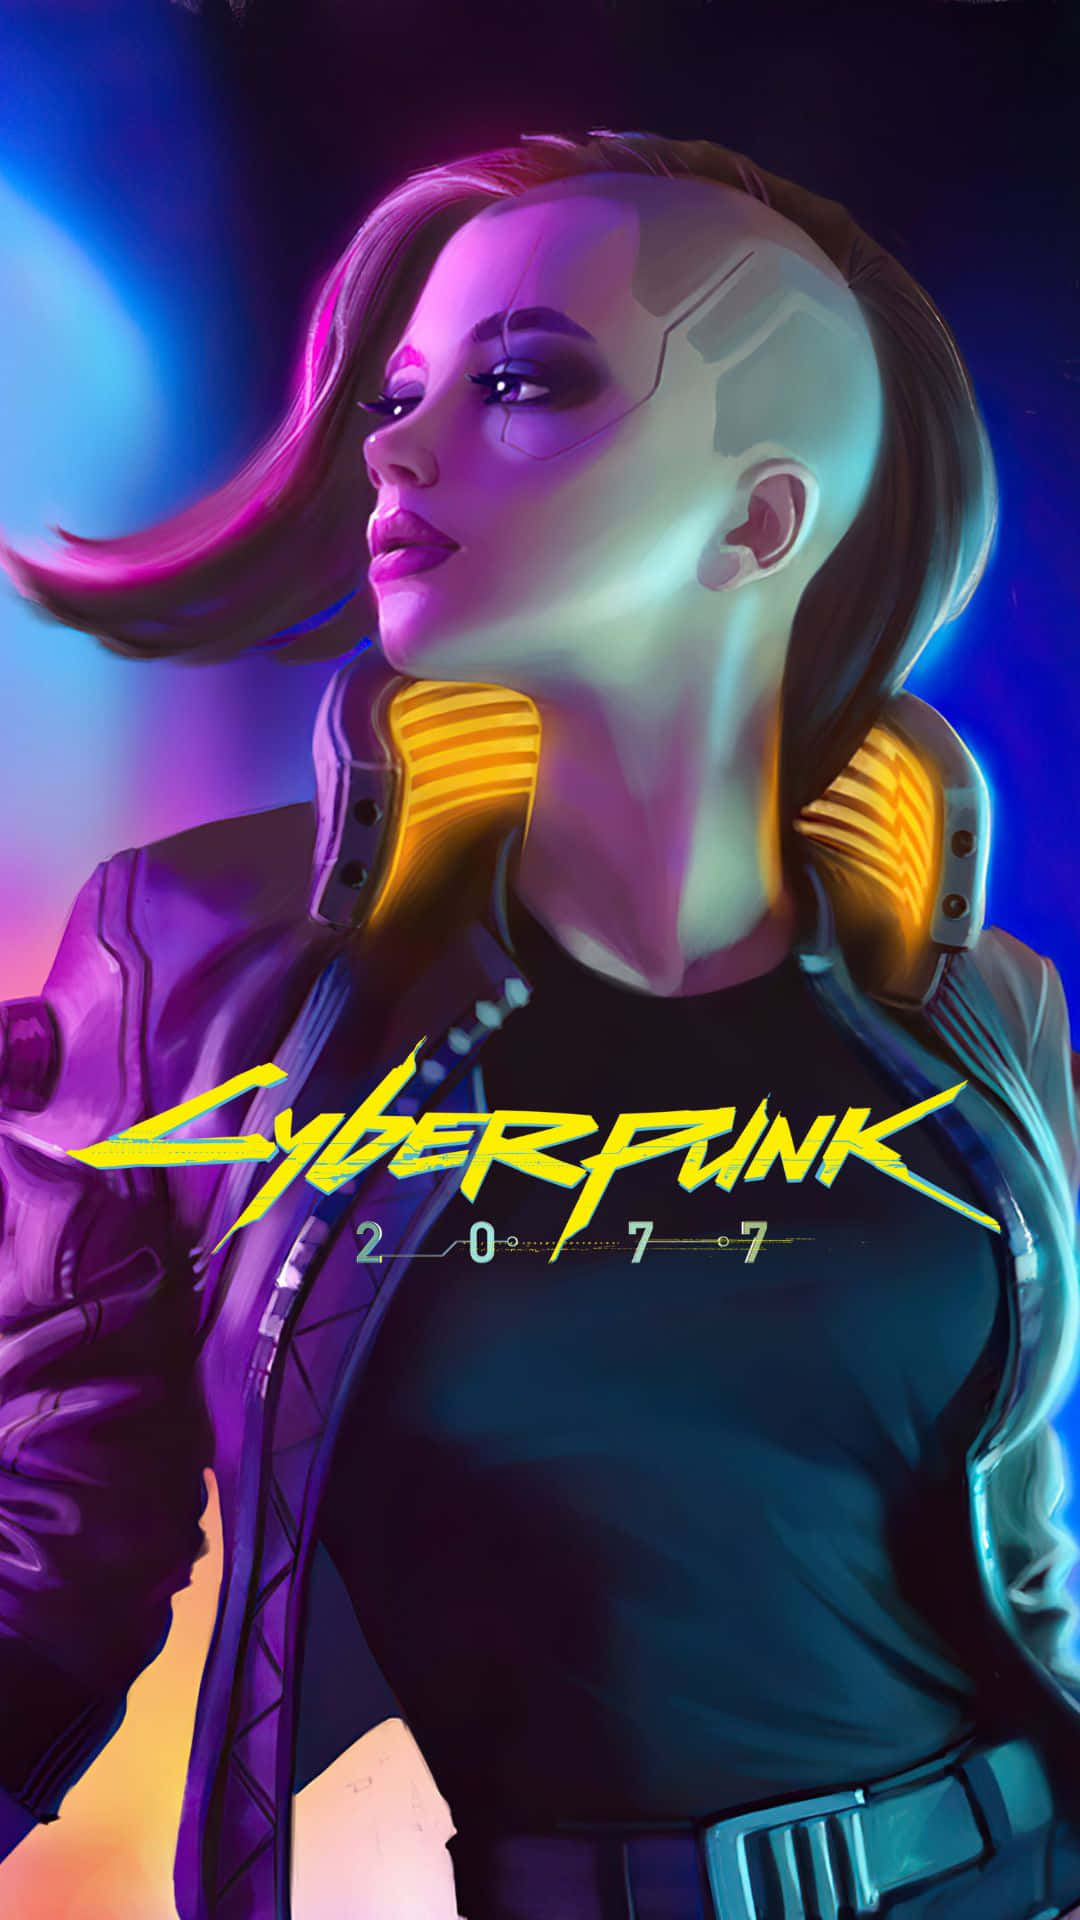 Android Cyberpunk 2077 Background Fanart Painting Of V